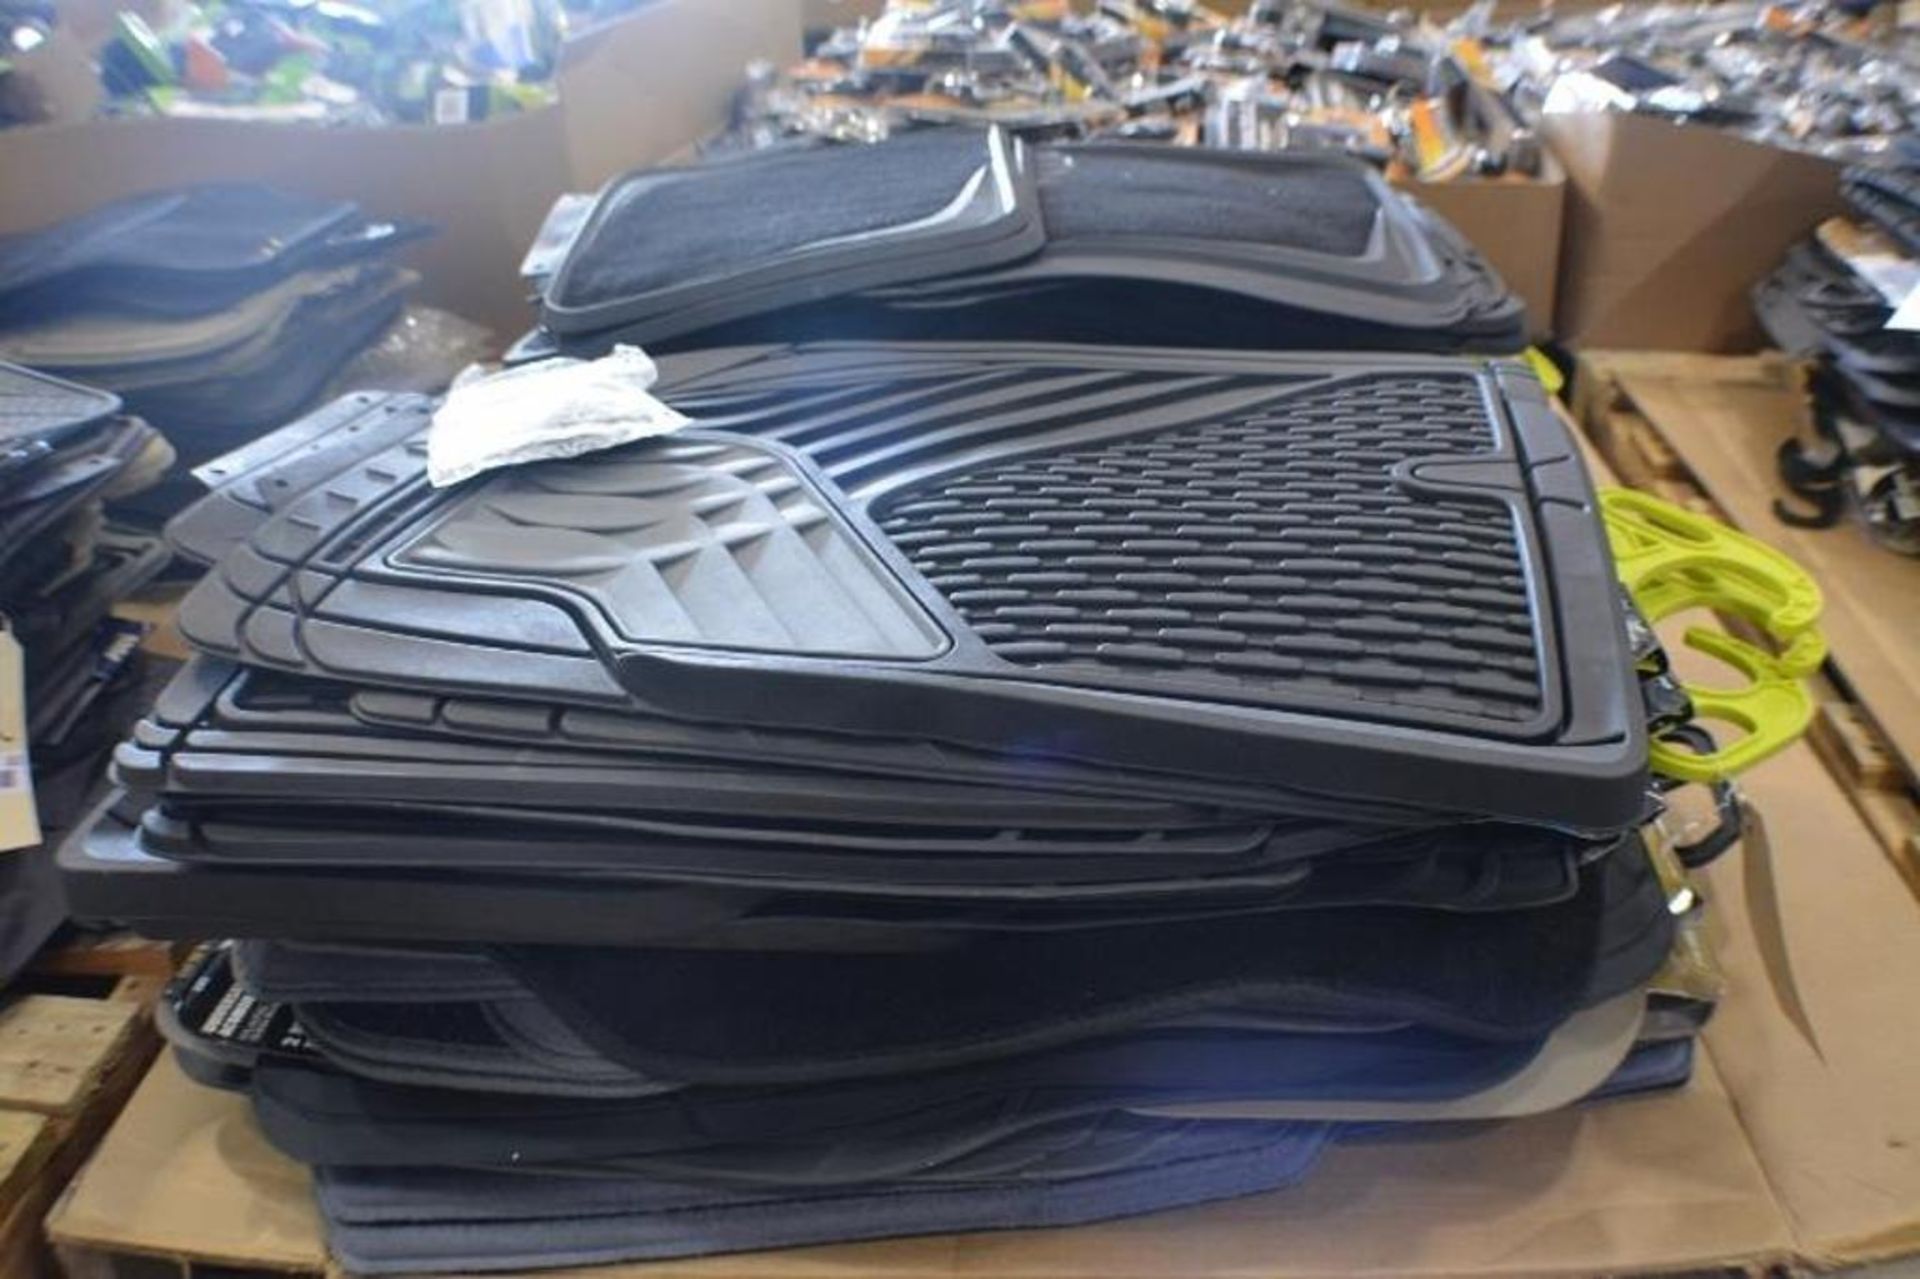 Car Floor Mats. Assorted Sizes and Styles. Contents of Pallet - Image 2 of 3